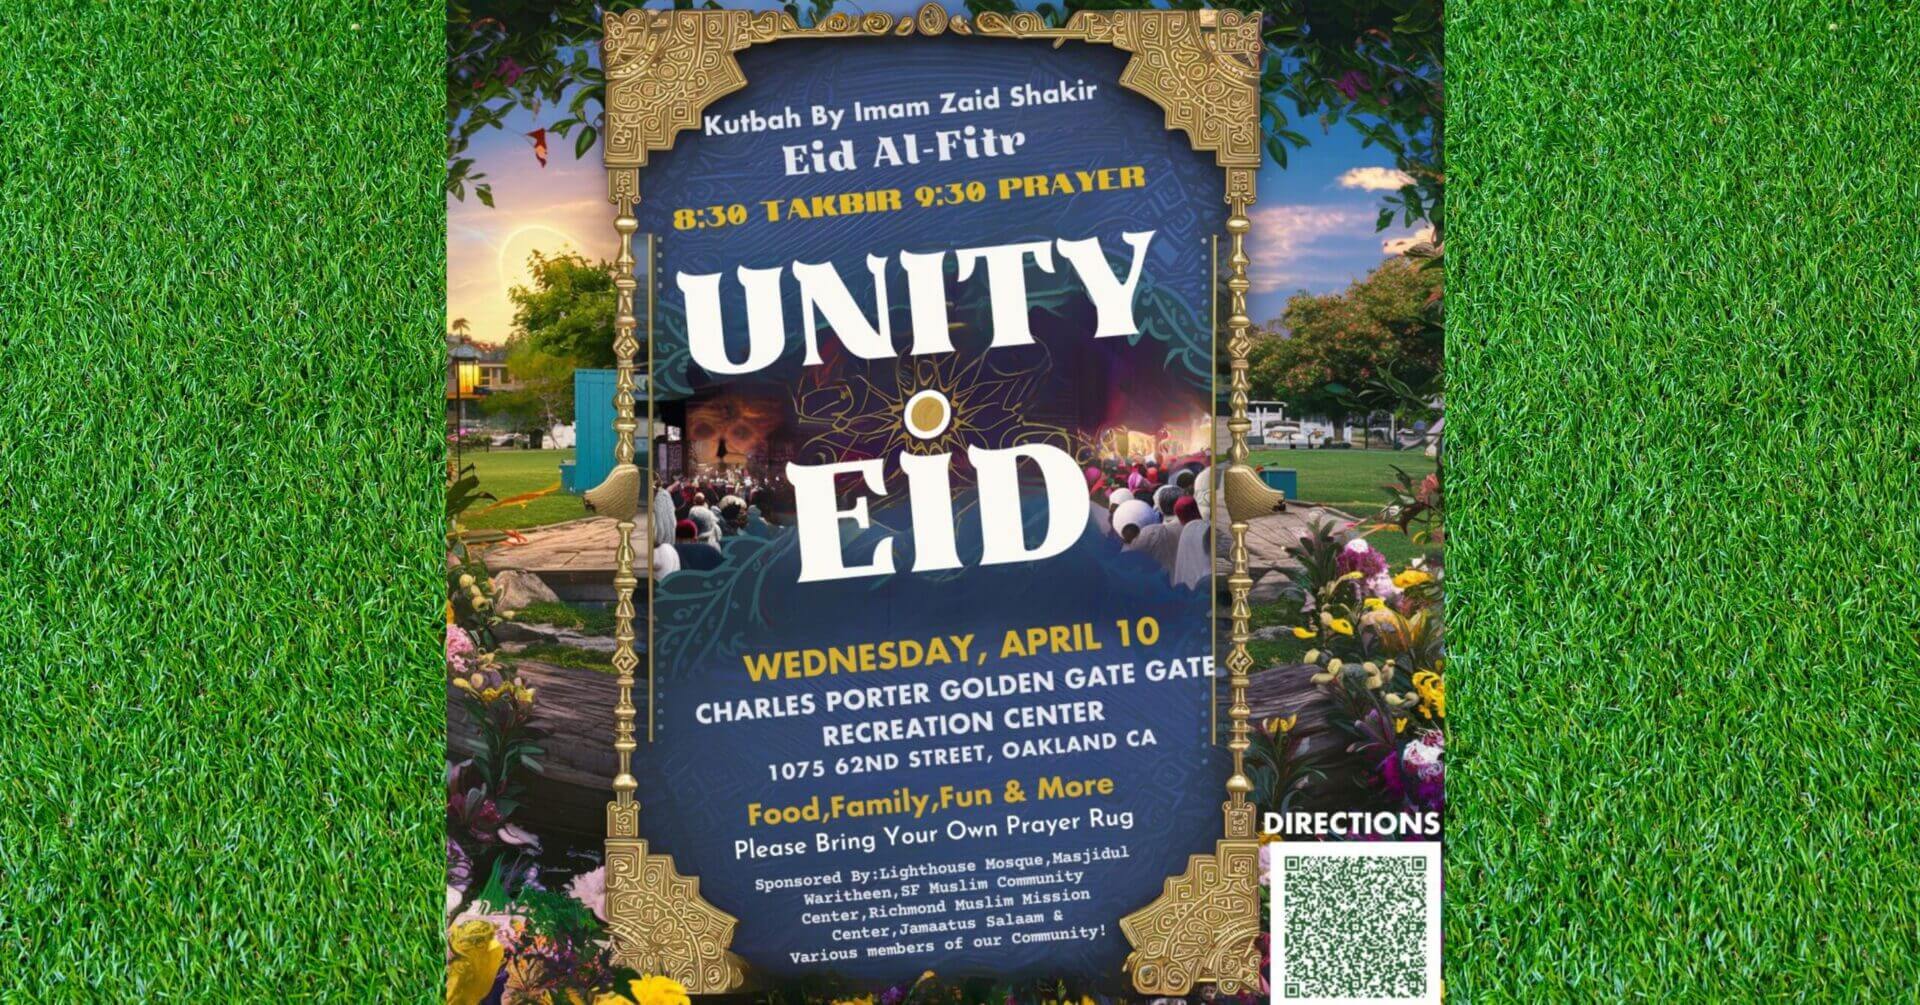 Wednesday, April 10th Time: Eid Takbir starts at 8:30 AM Prayer led by Imam Zaid Shakir at 9:00 AM Location: Golden Gate Recreation Center 1075 62nd Street Oakland, CA